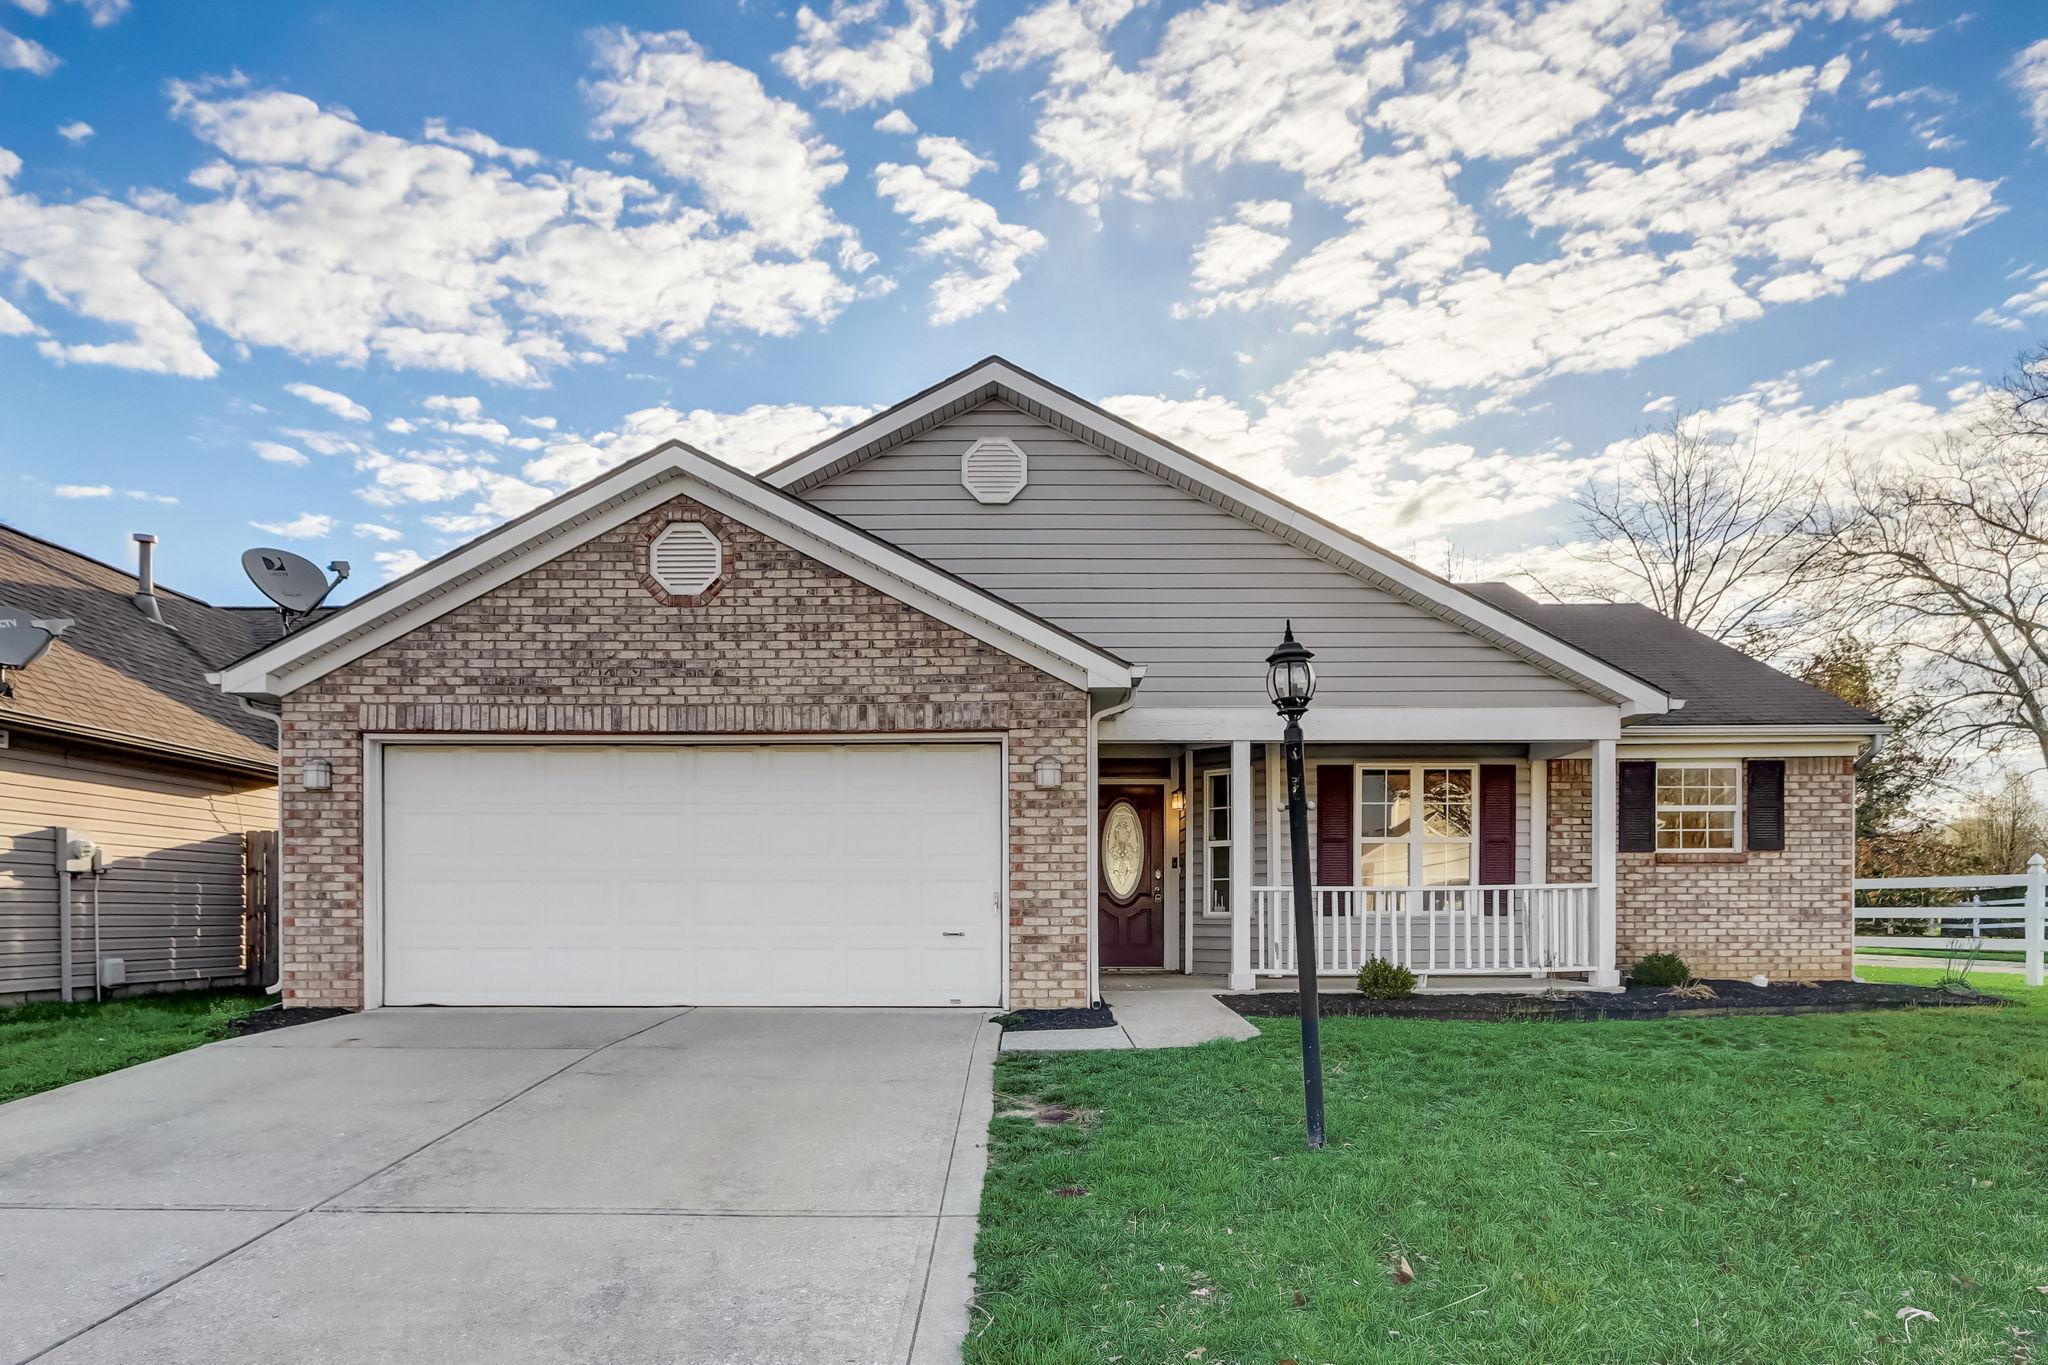 Photo one of 703 Coffee Tree Cir Indianapolis IN 46224 | MLS 21969883